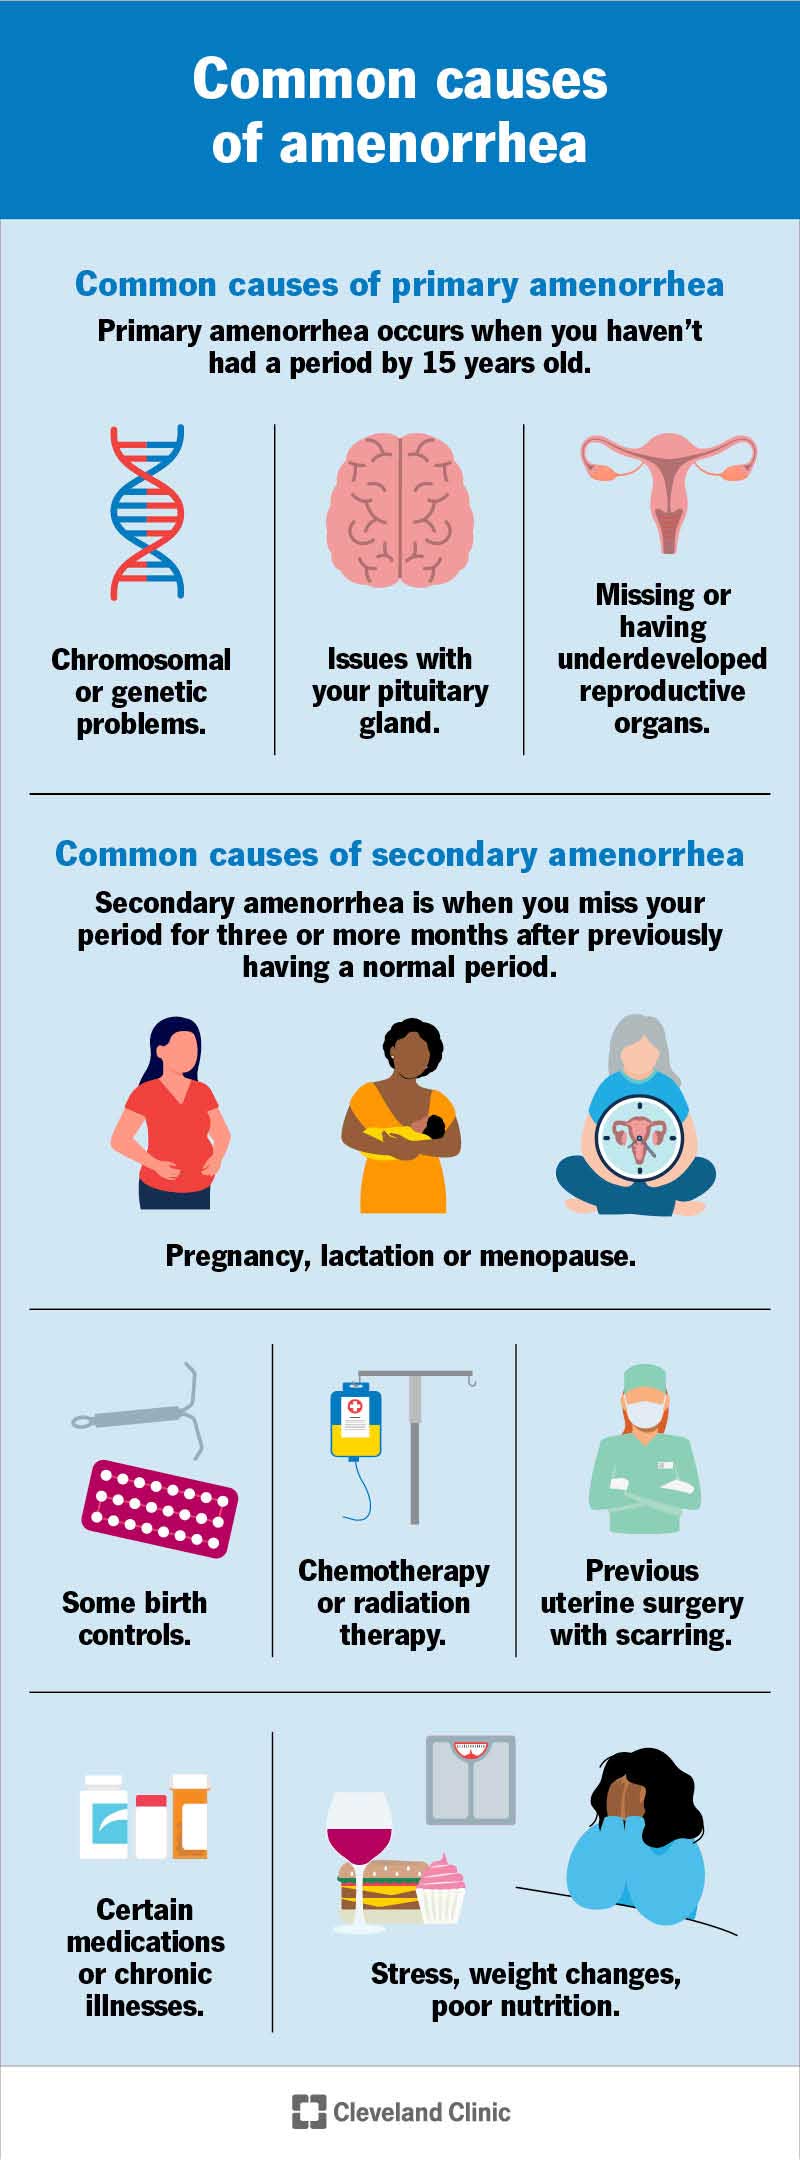 Common causes of primary and secondary amenorrhea.